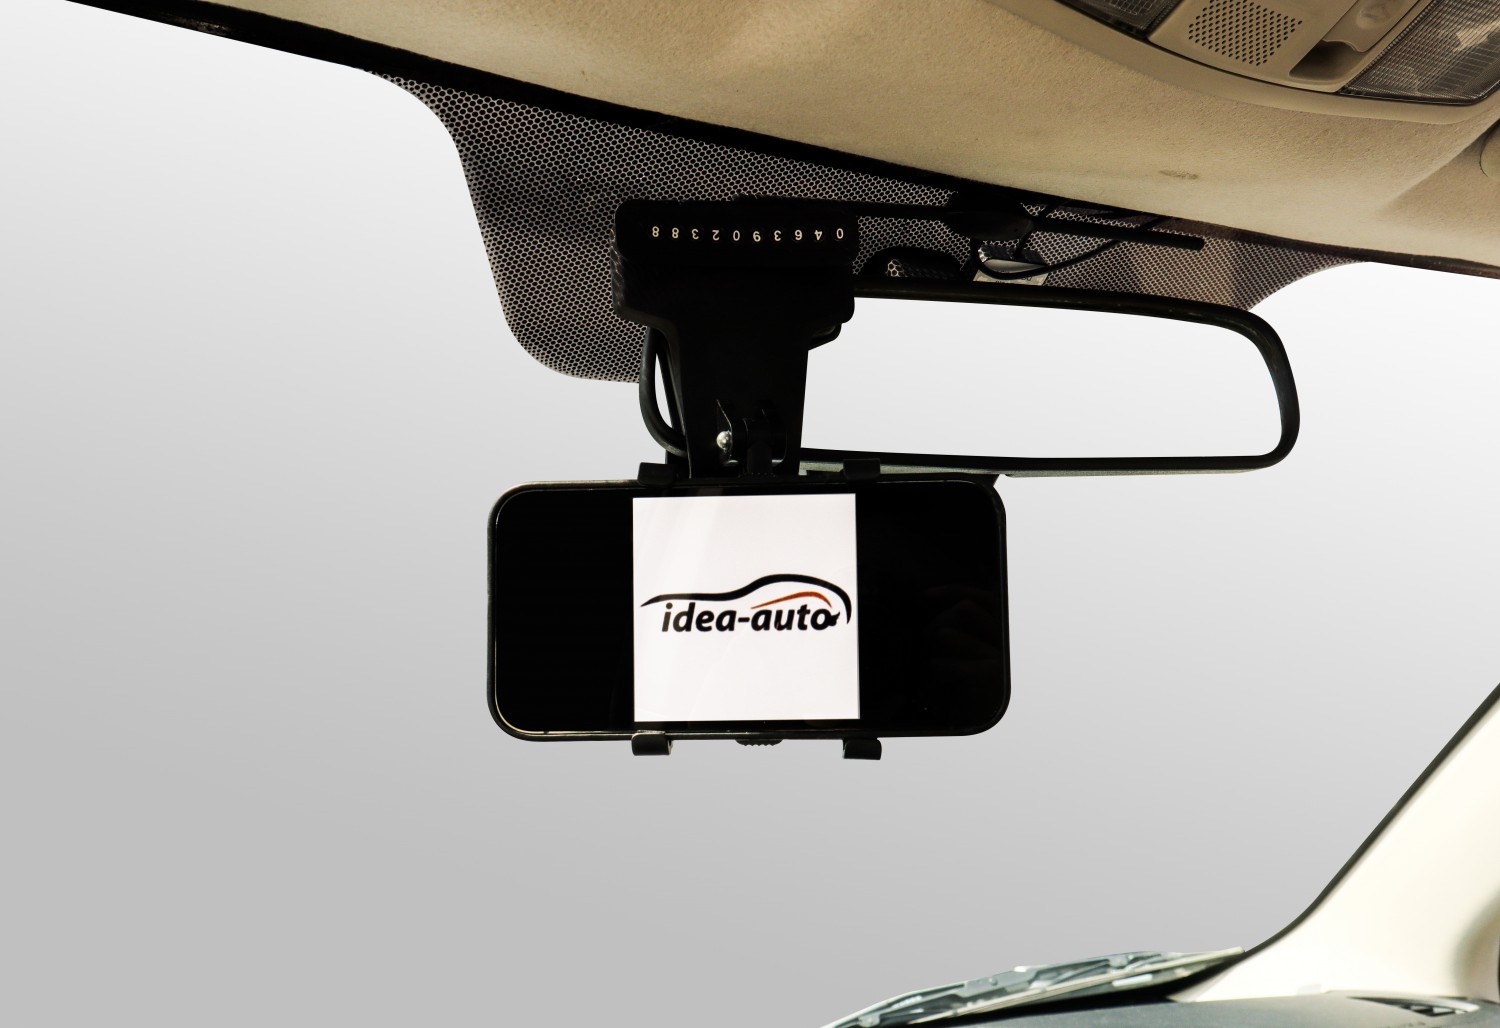 【idea-auto】Smart phone holder with Parking Number